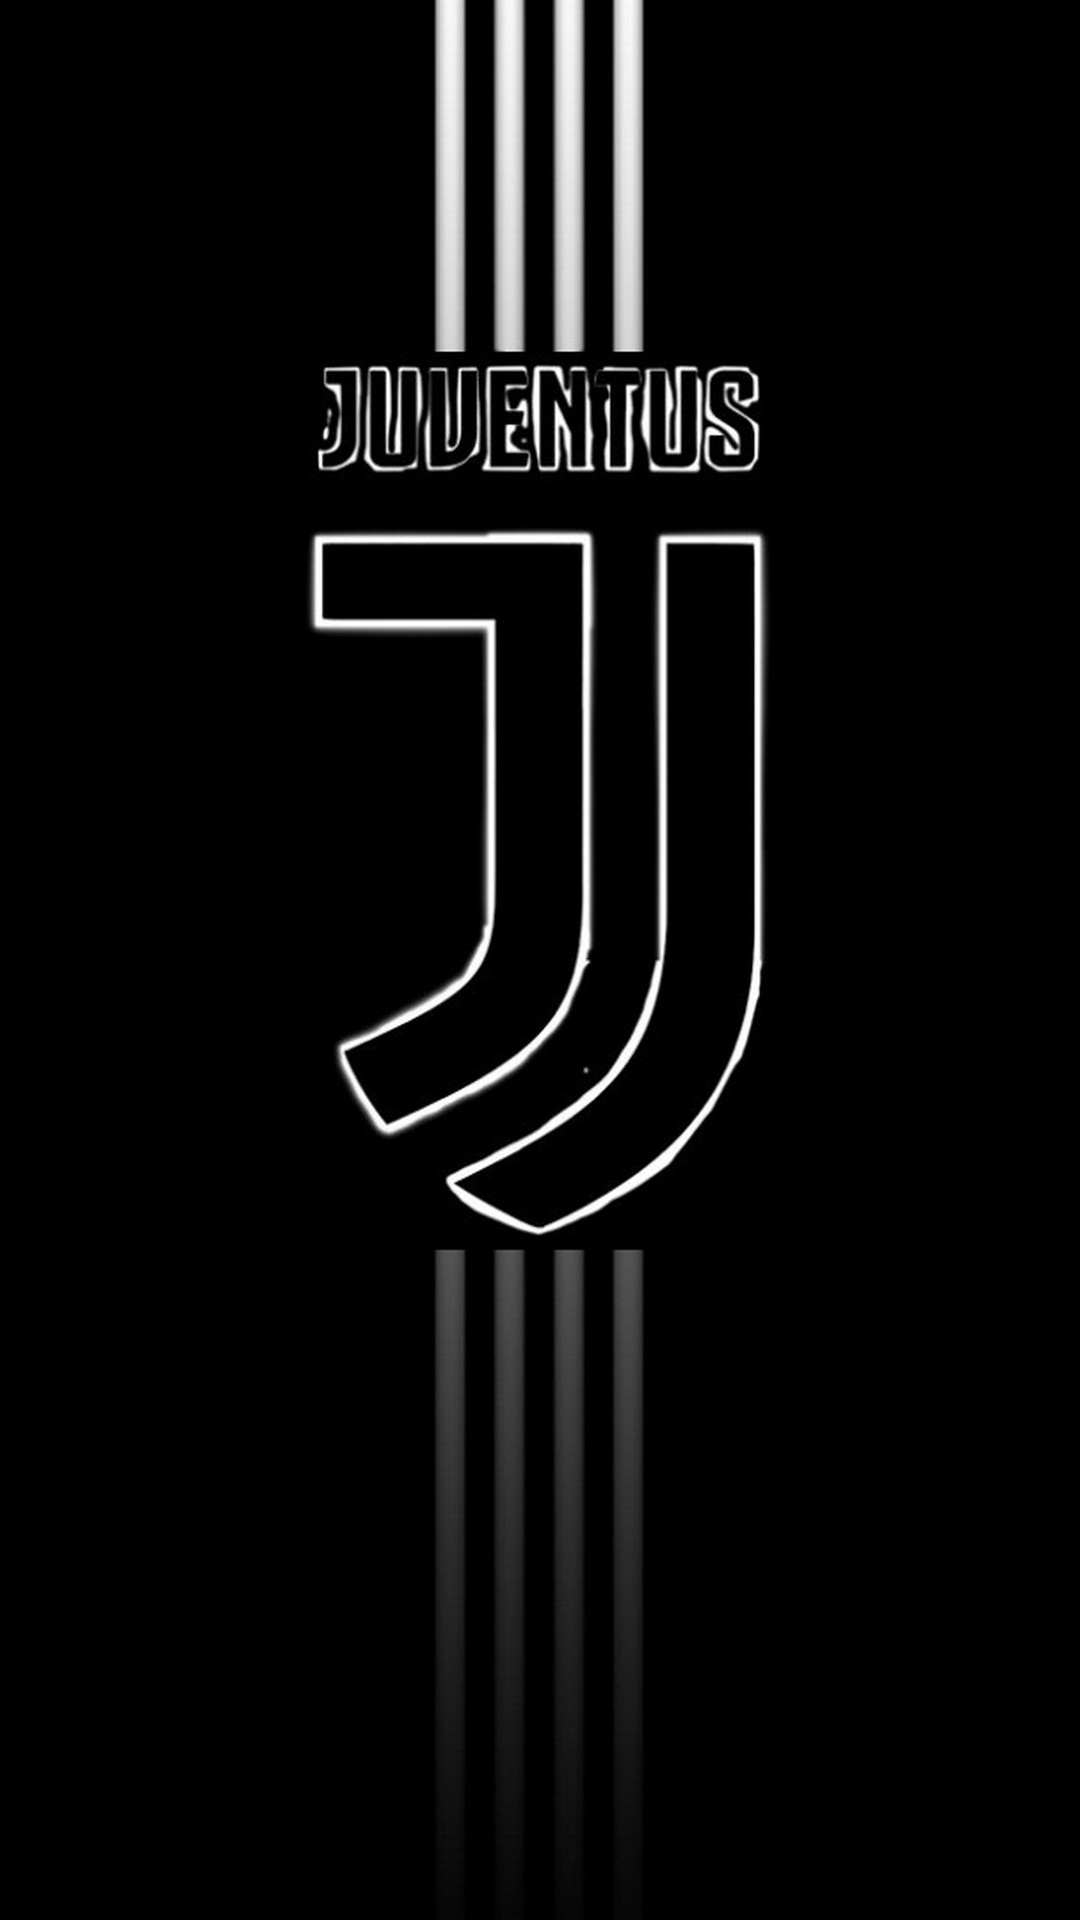 Juventus FC iPhone X Wallpaper With Resolution 1080X1920 pixel. You can make this wallpaper for your Mac or Windows Desktop Background, iPhone, Android or Tablet and another Smartphone device for free